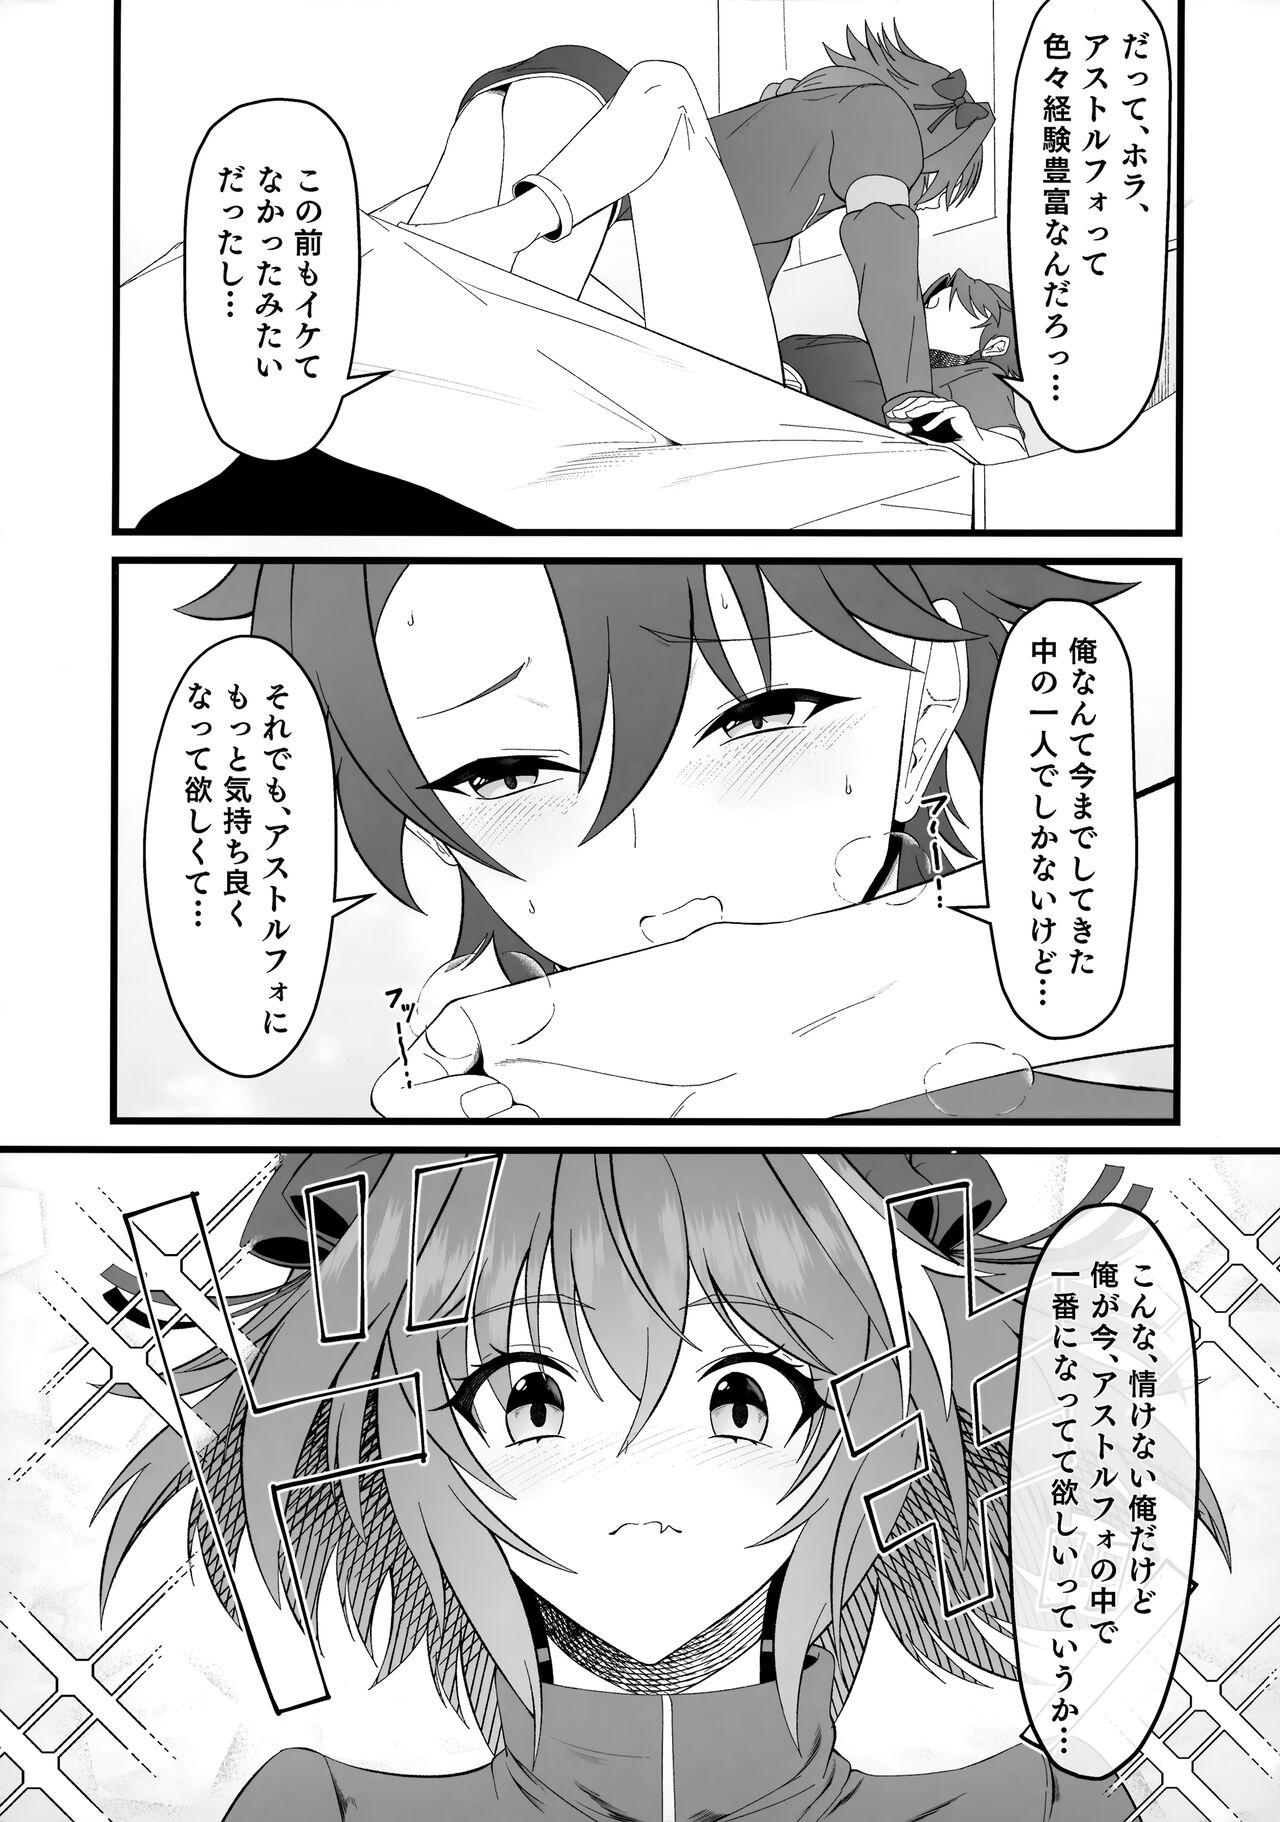 Tugging Kimi no Ichiban ni Naritakute - I wanted to be your number one. - Fate grand order Closeup - Page 8